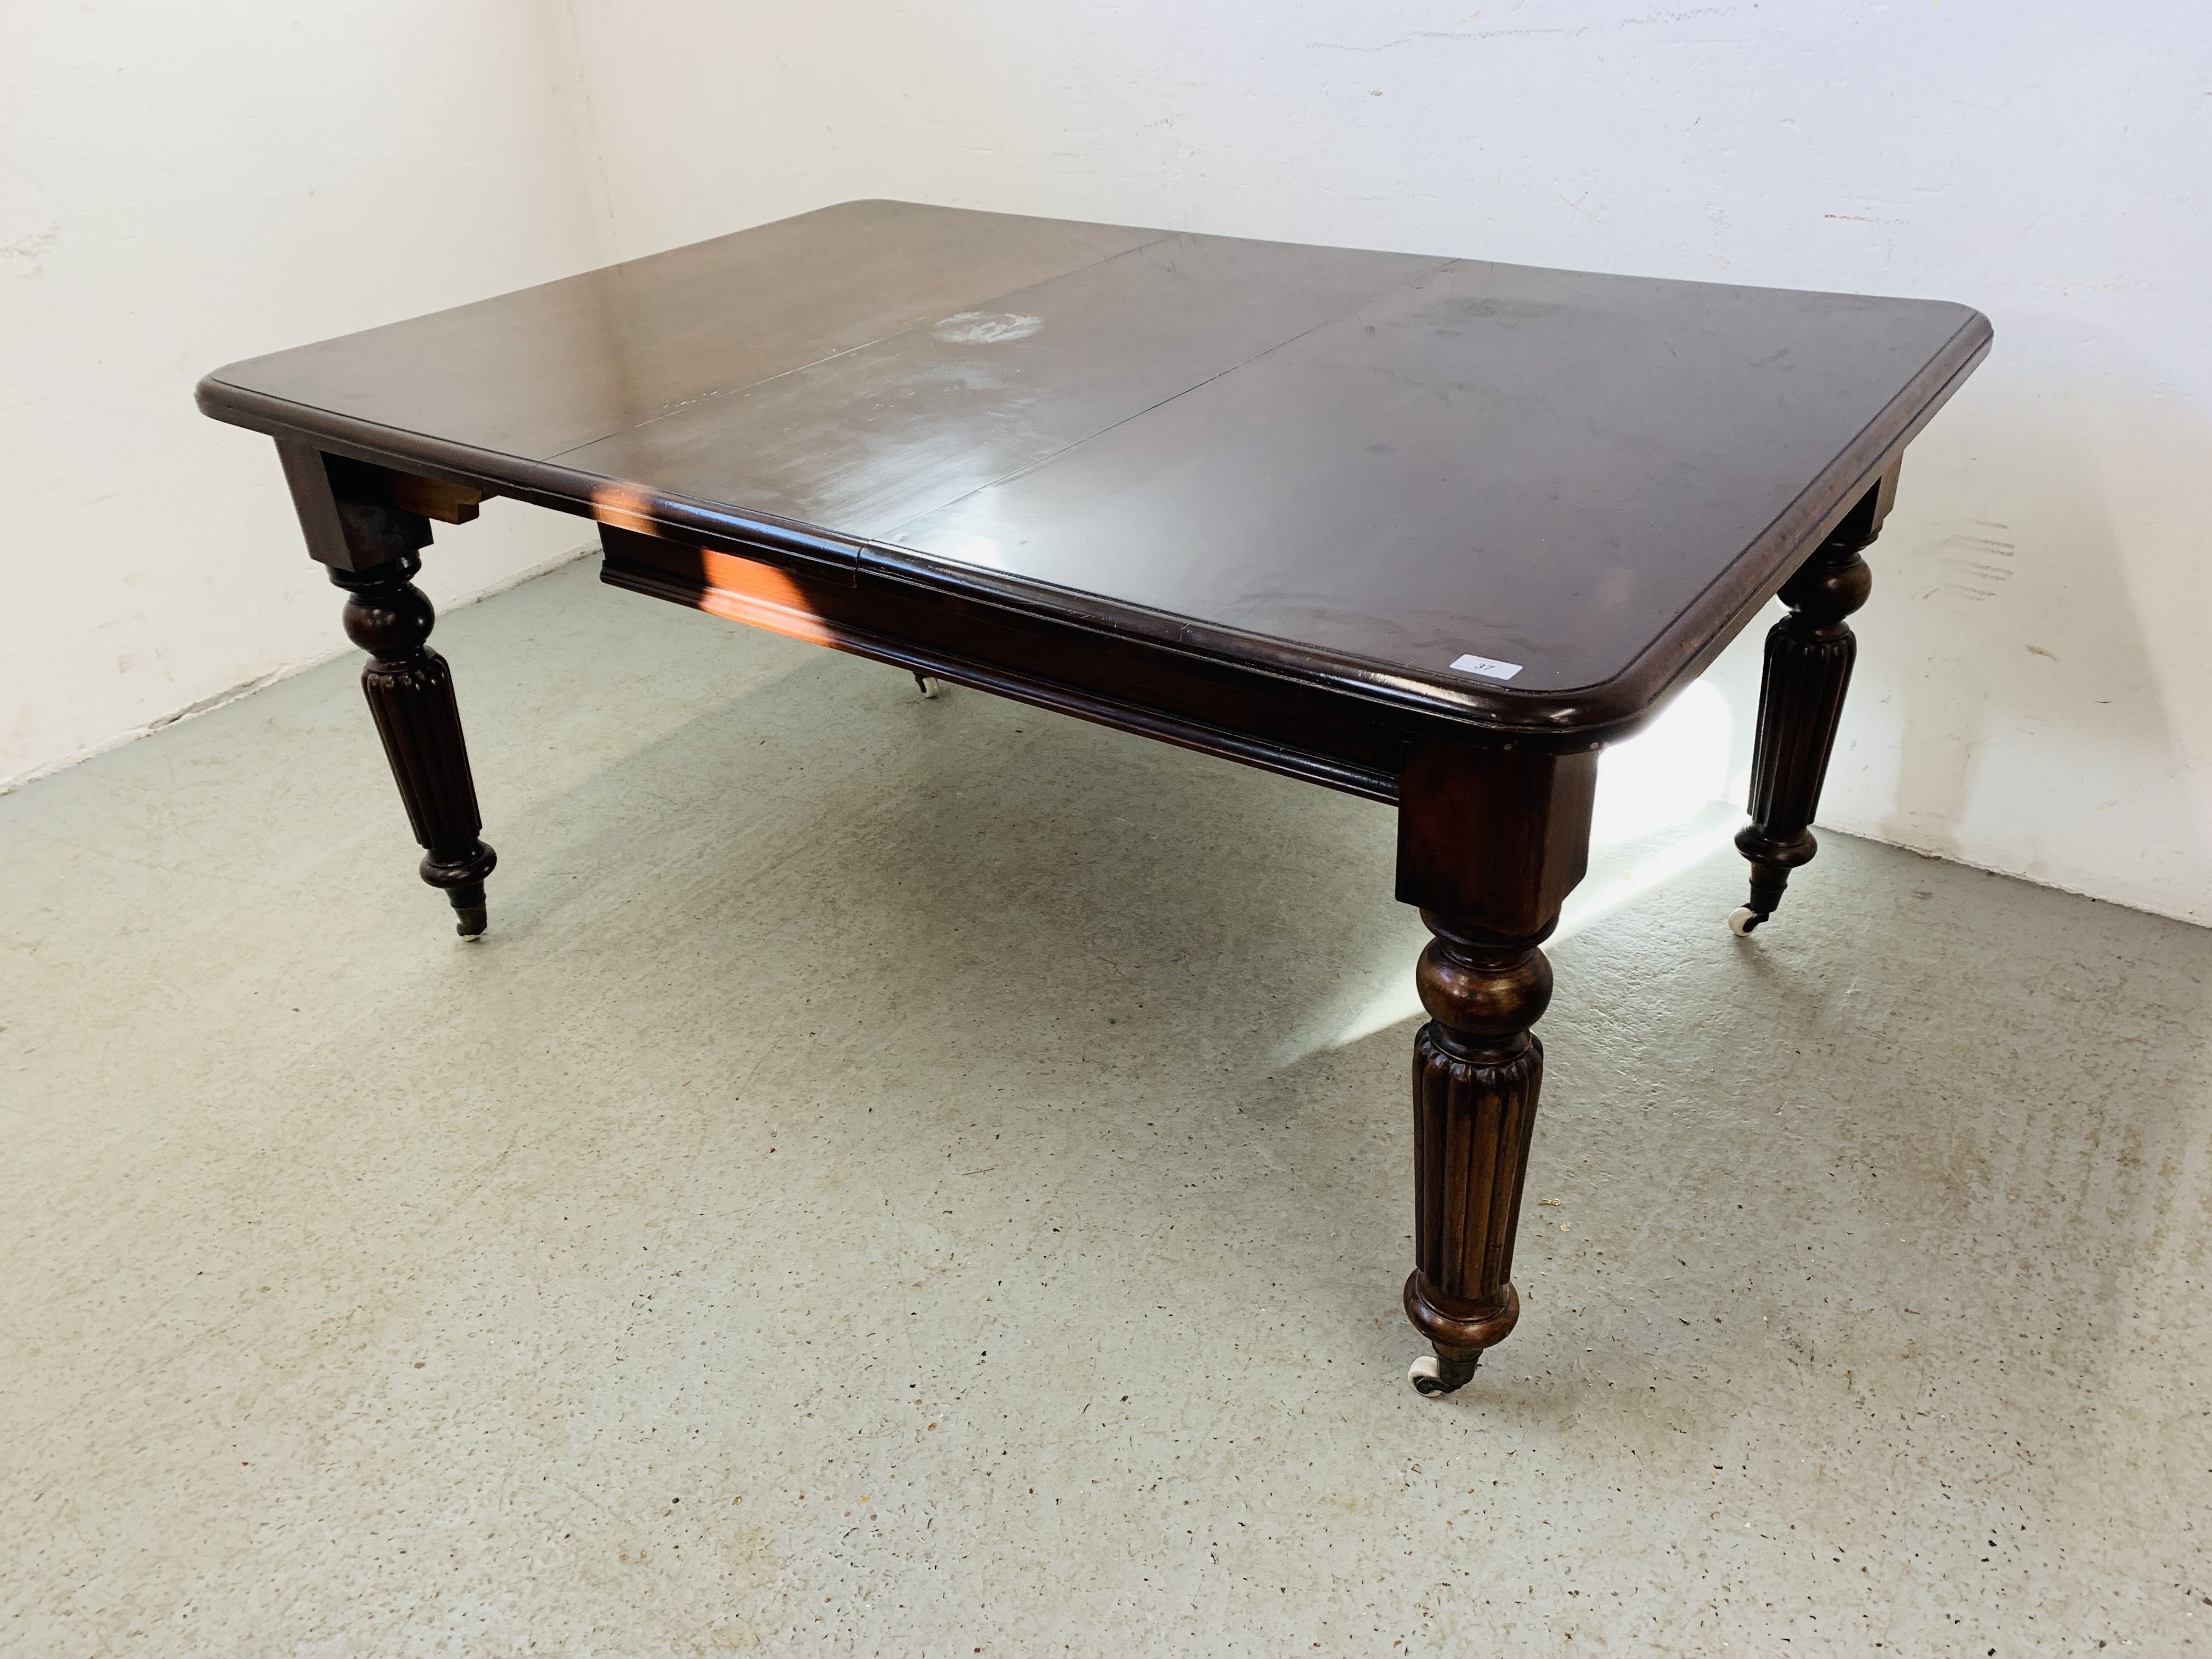 VICTORIAN MAHOGANY EXTENDING DINING TABLE, ON REEDED LEGS AND CERAMIC CASTORS (H 72CM, W 153CM,